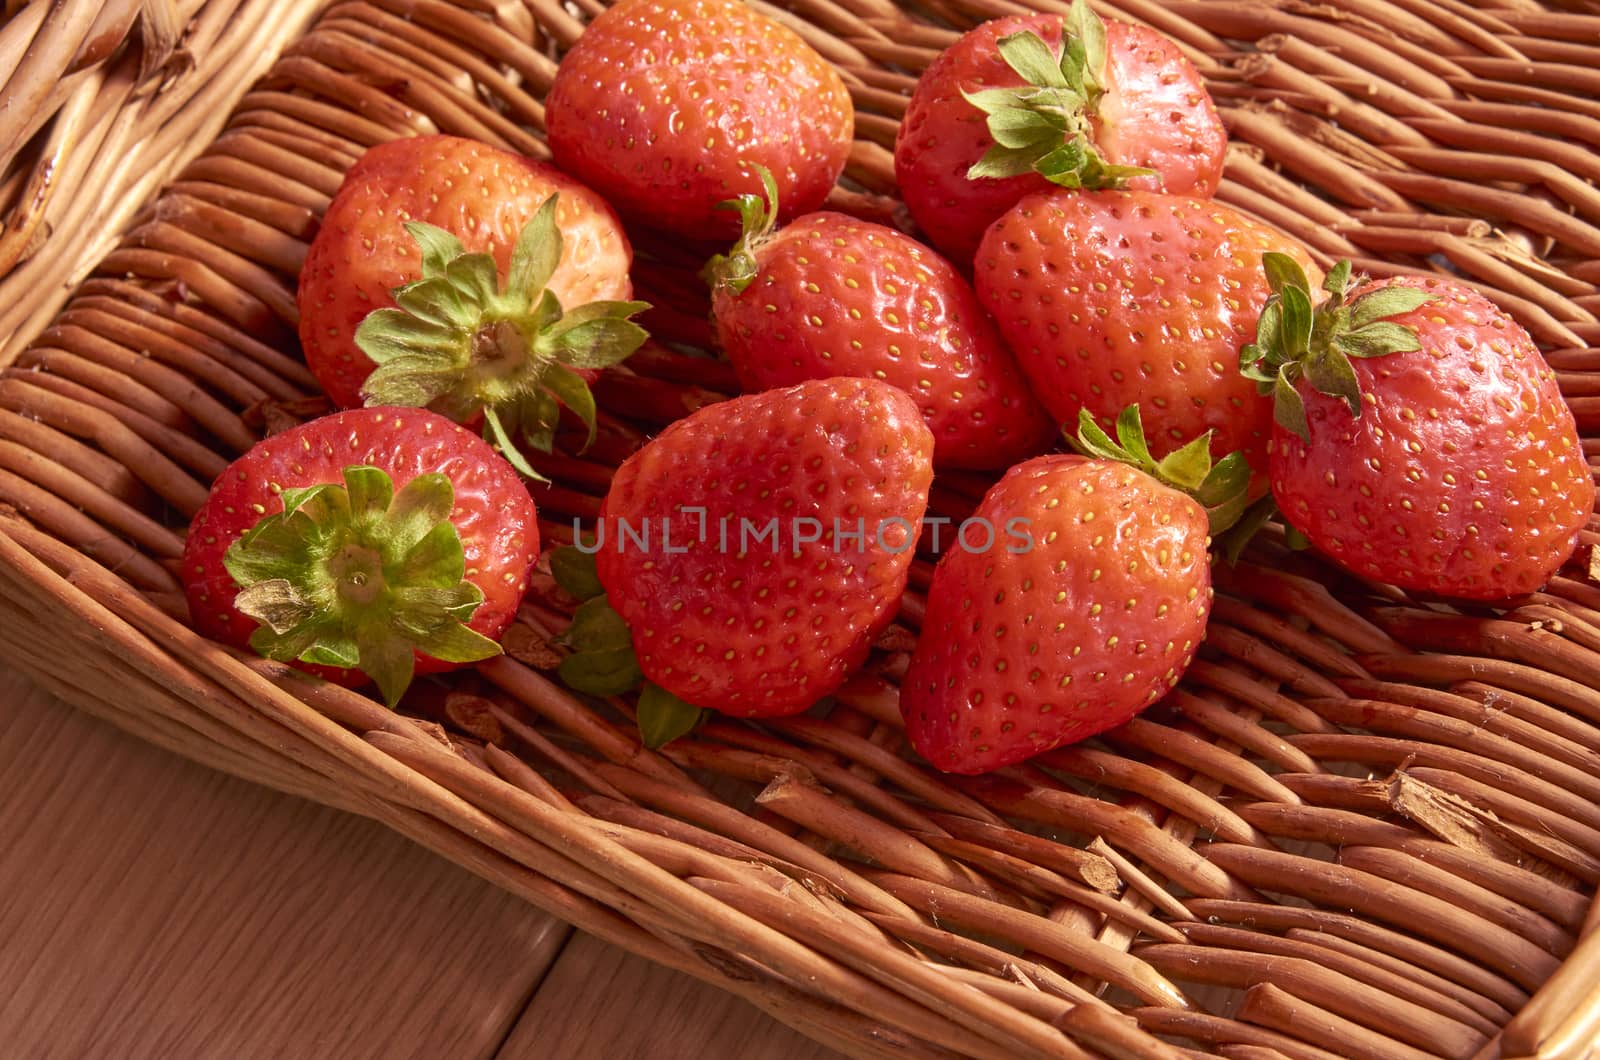 Strawberries in a cane basket, long exposure with natural light